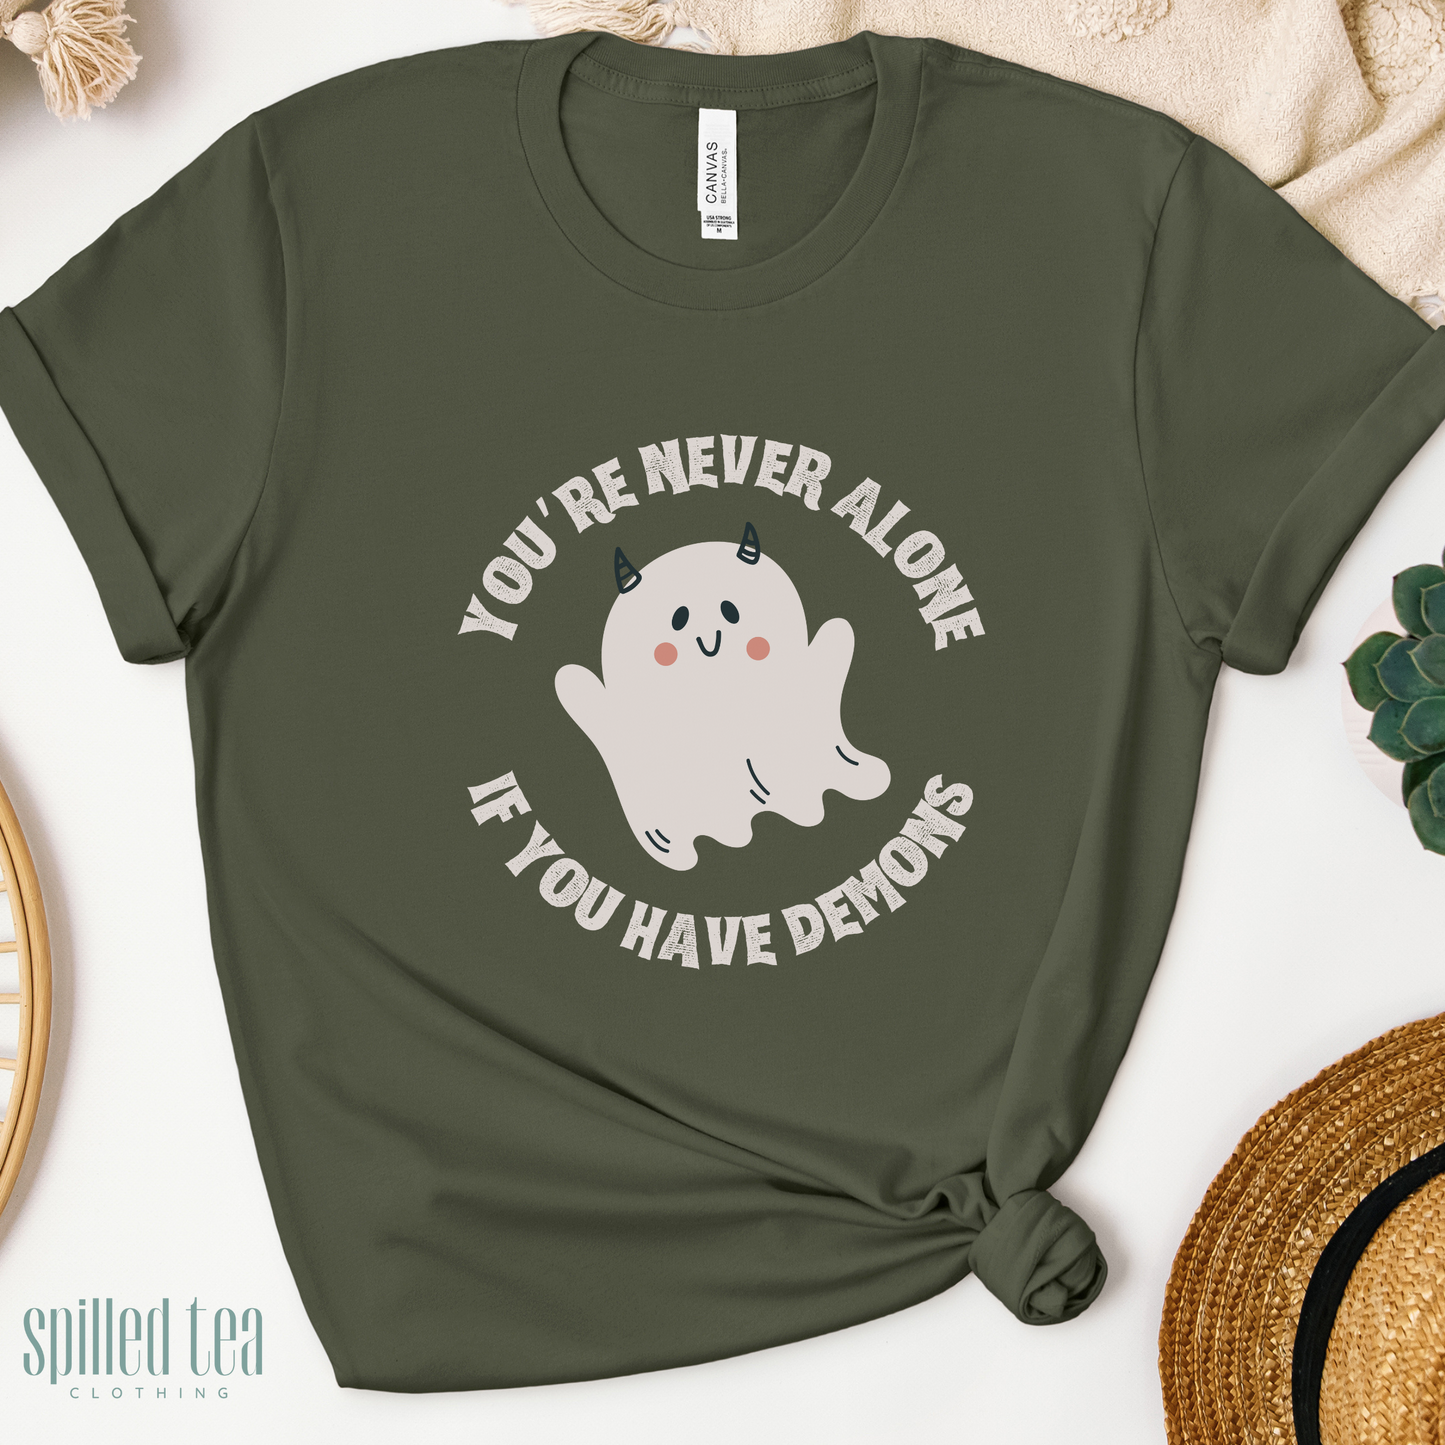 You're Never Alone T-Shirt